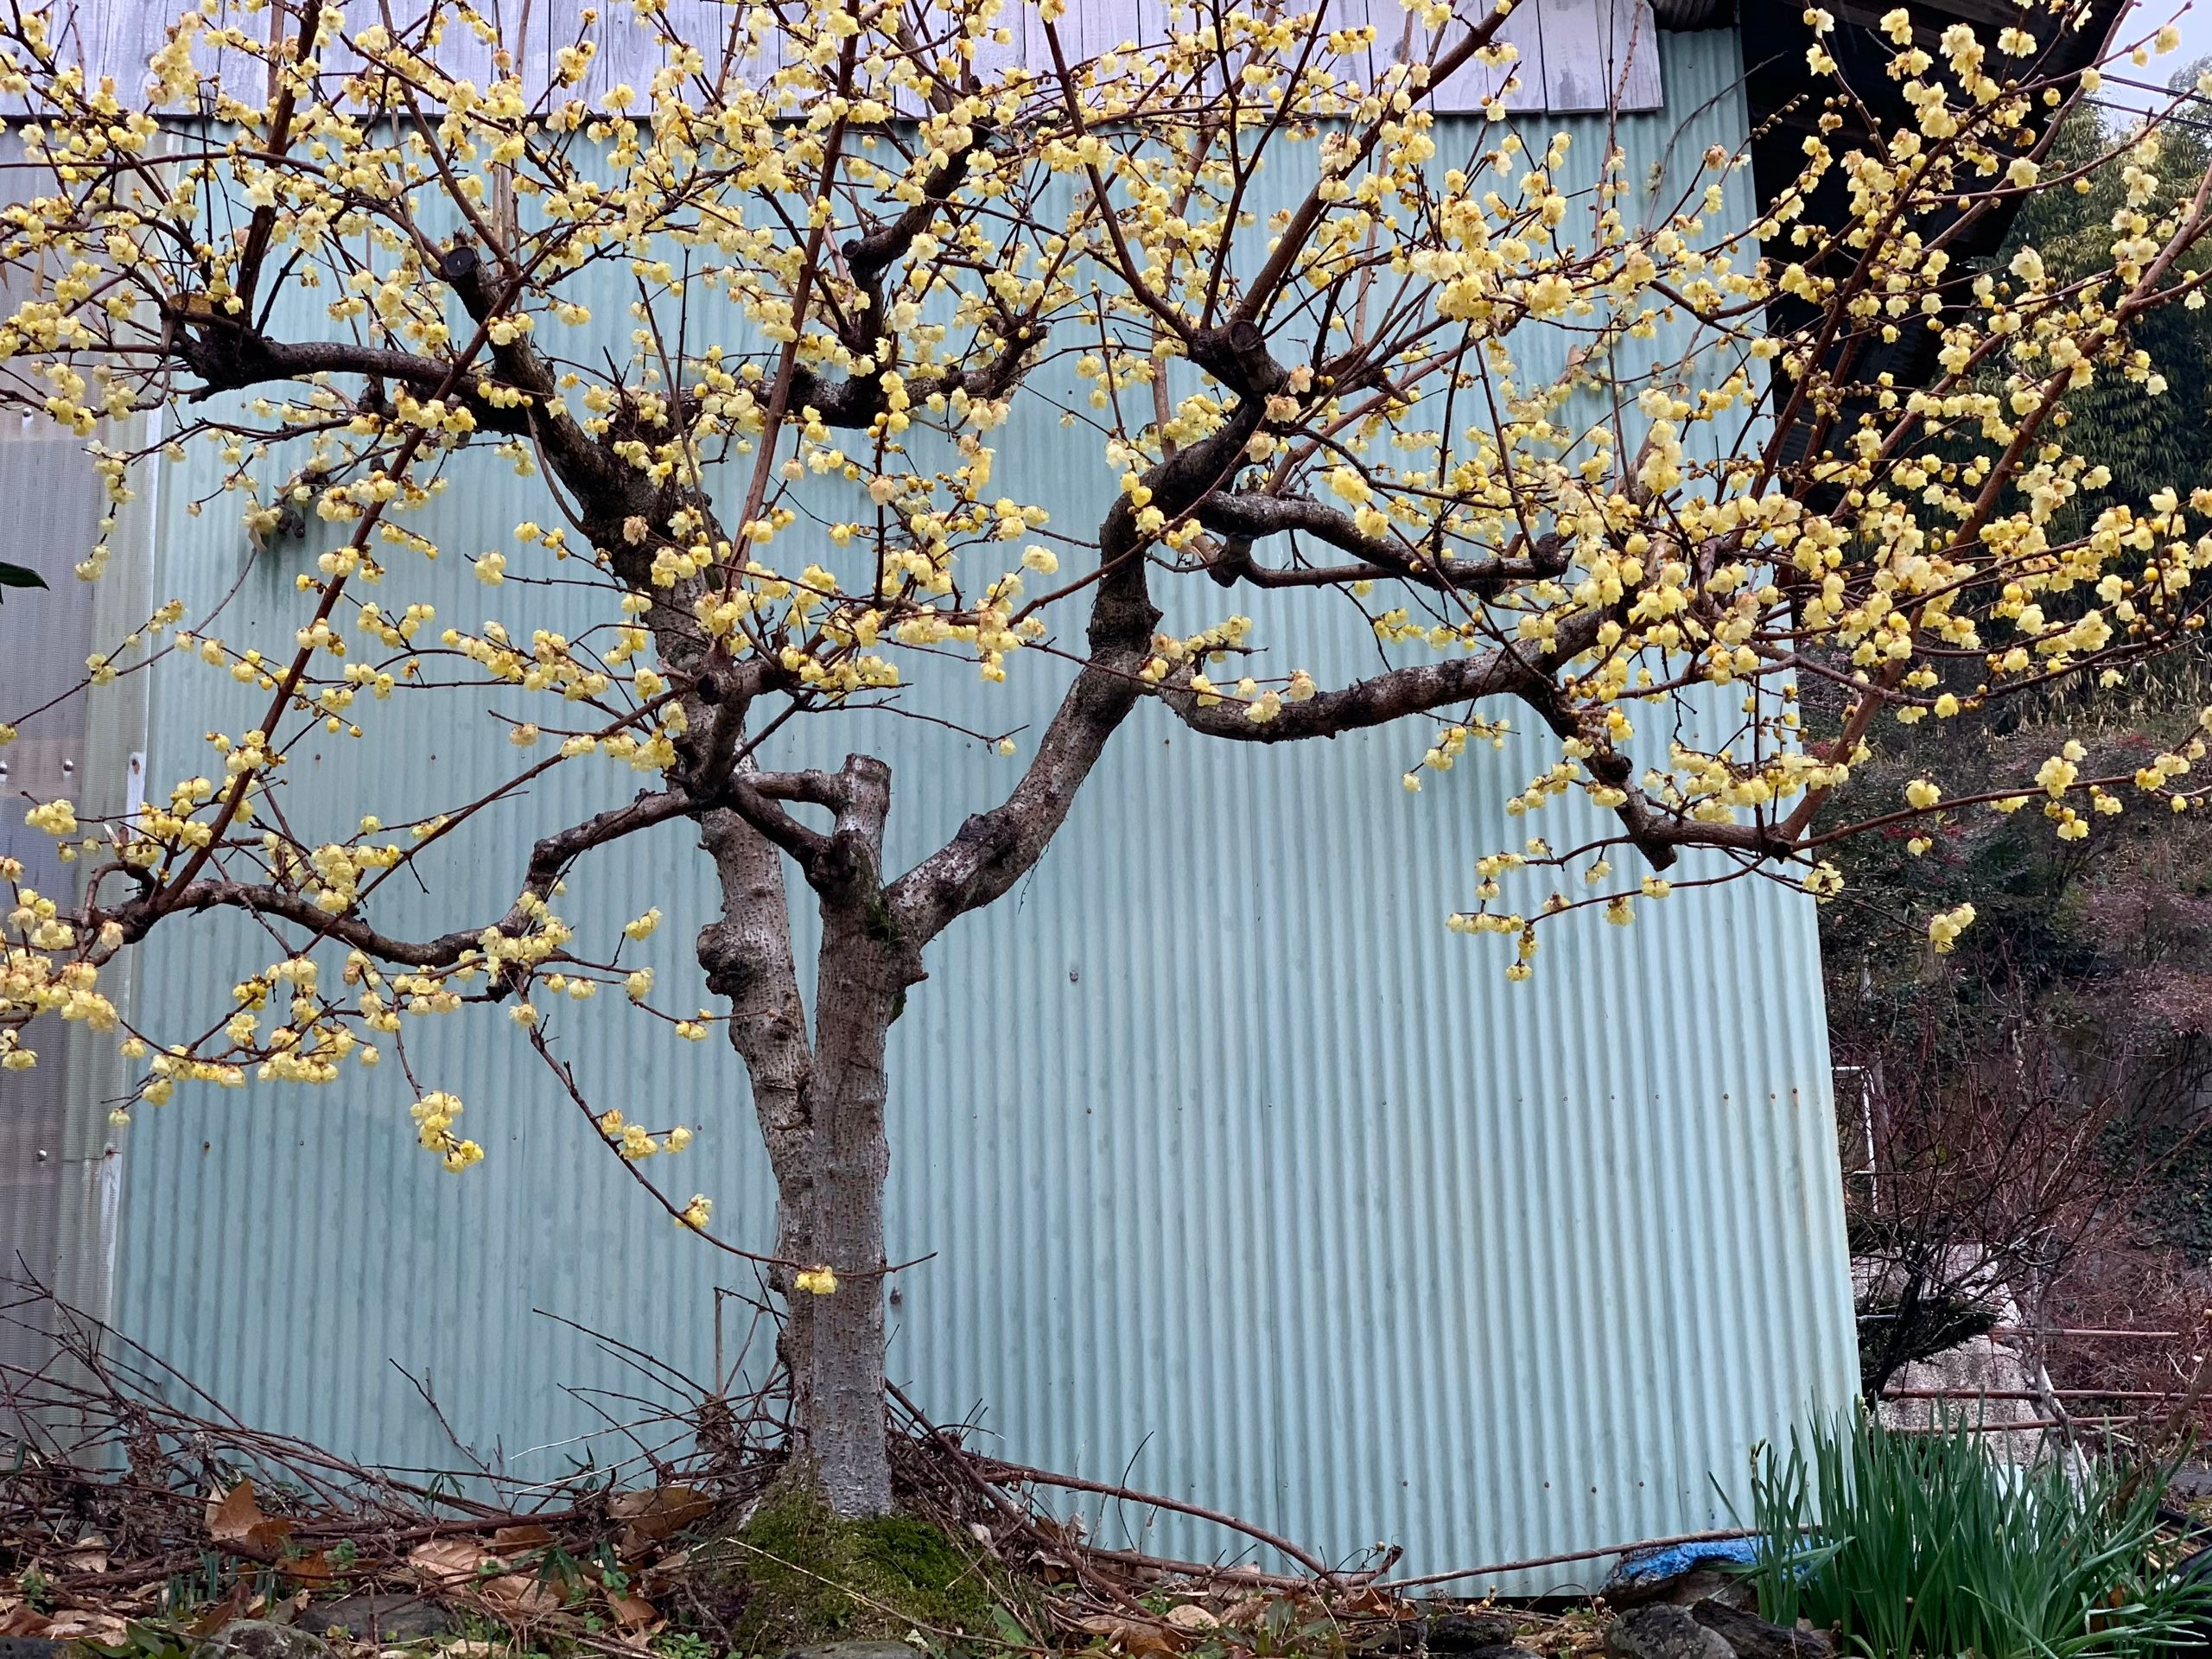 A tree in yellow bloom.